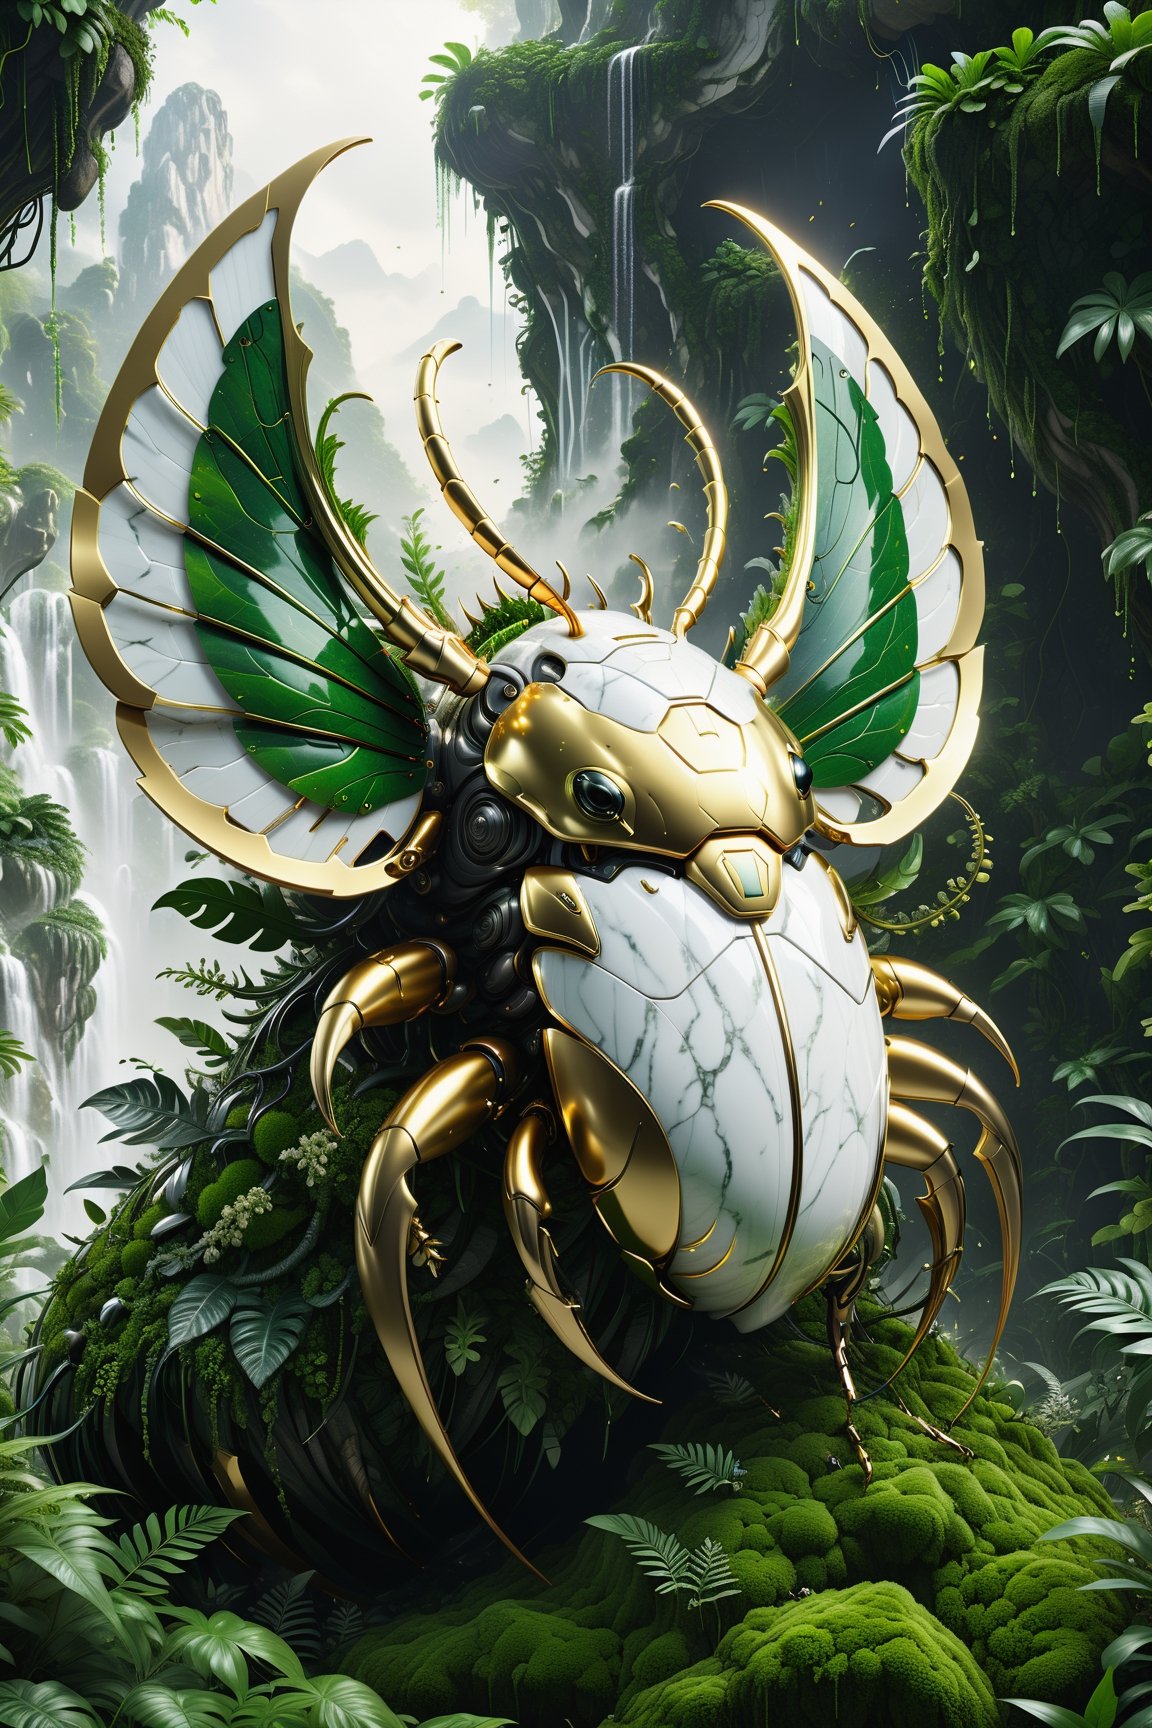 High definition photorealistic render of an incredible and mysterious futuristic mythical creating creature inusual big with csquid-shaped beetle wings in splosion monster with parametric shape and structure in the word, curved and fluid shapes in a thick jungle full of a lot of vegetation and trees with vines and rocks with moss, in white marble with intricate gold details, luxurious details and parametric architectural style in marble and metal, epic pose
​